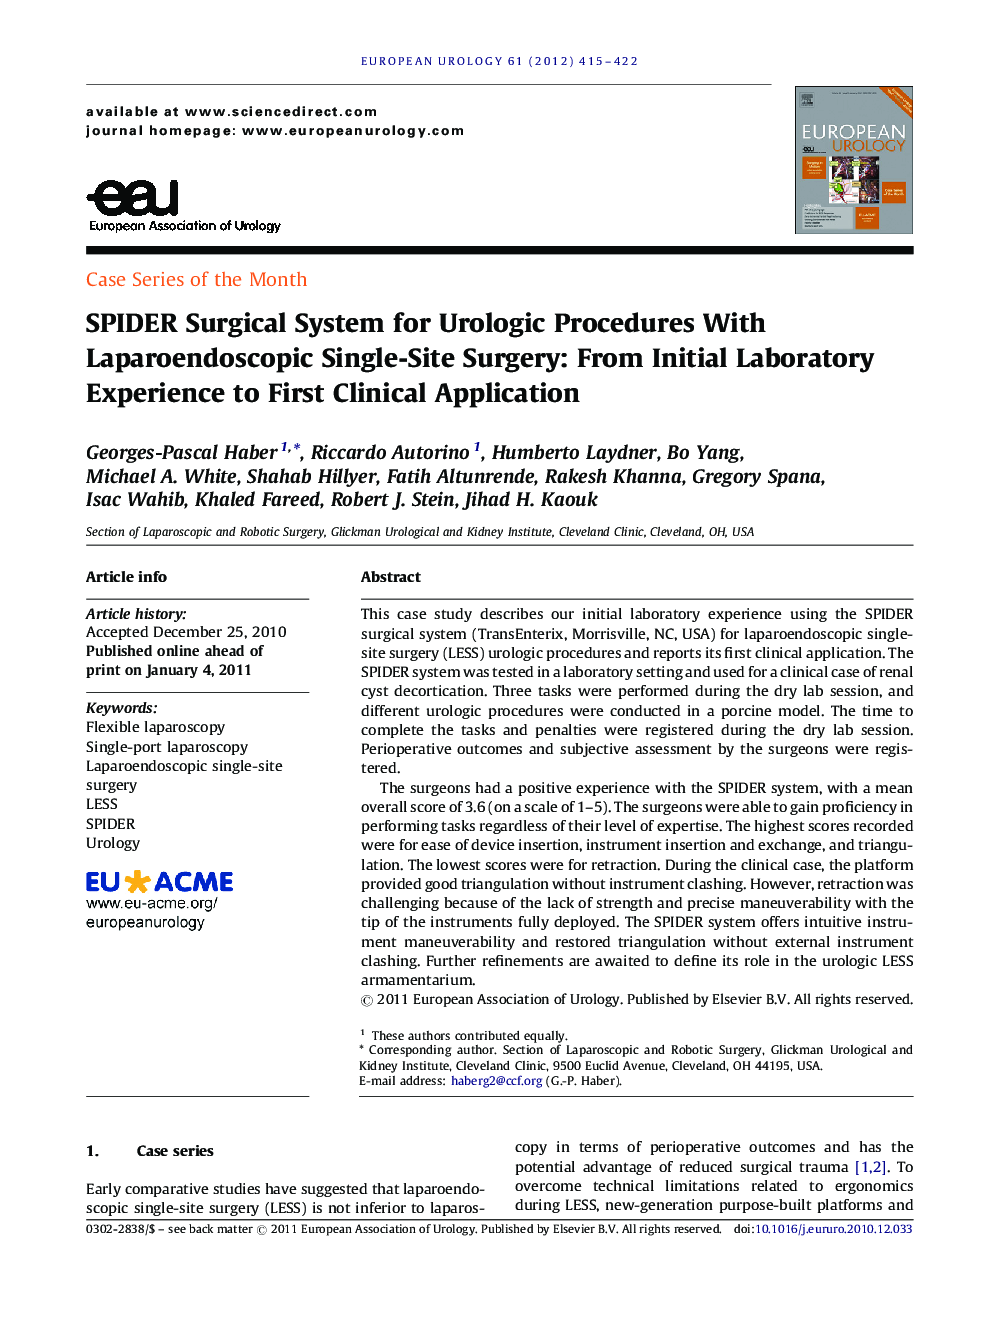 SPIDER Surgical System for Urologic Procedures With Laparoendoscopic Single-Site Surgery: From Initial Laboratory Experience to First Clinical Application